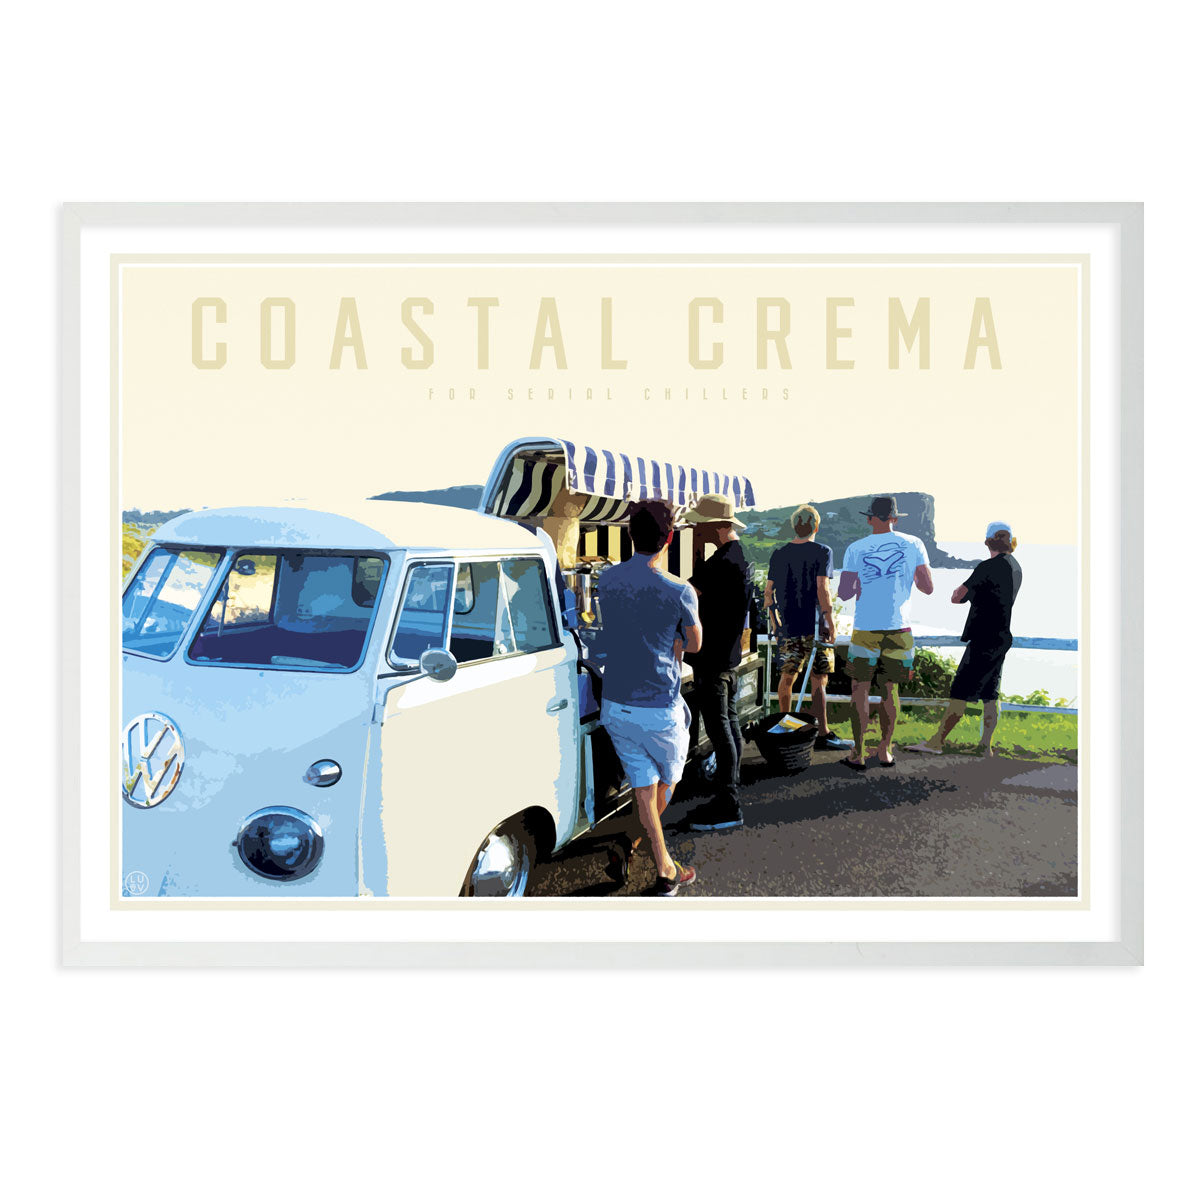 Coastal crema print in white frame by Placesweluv 